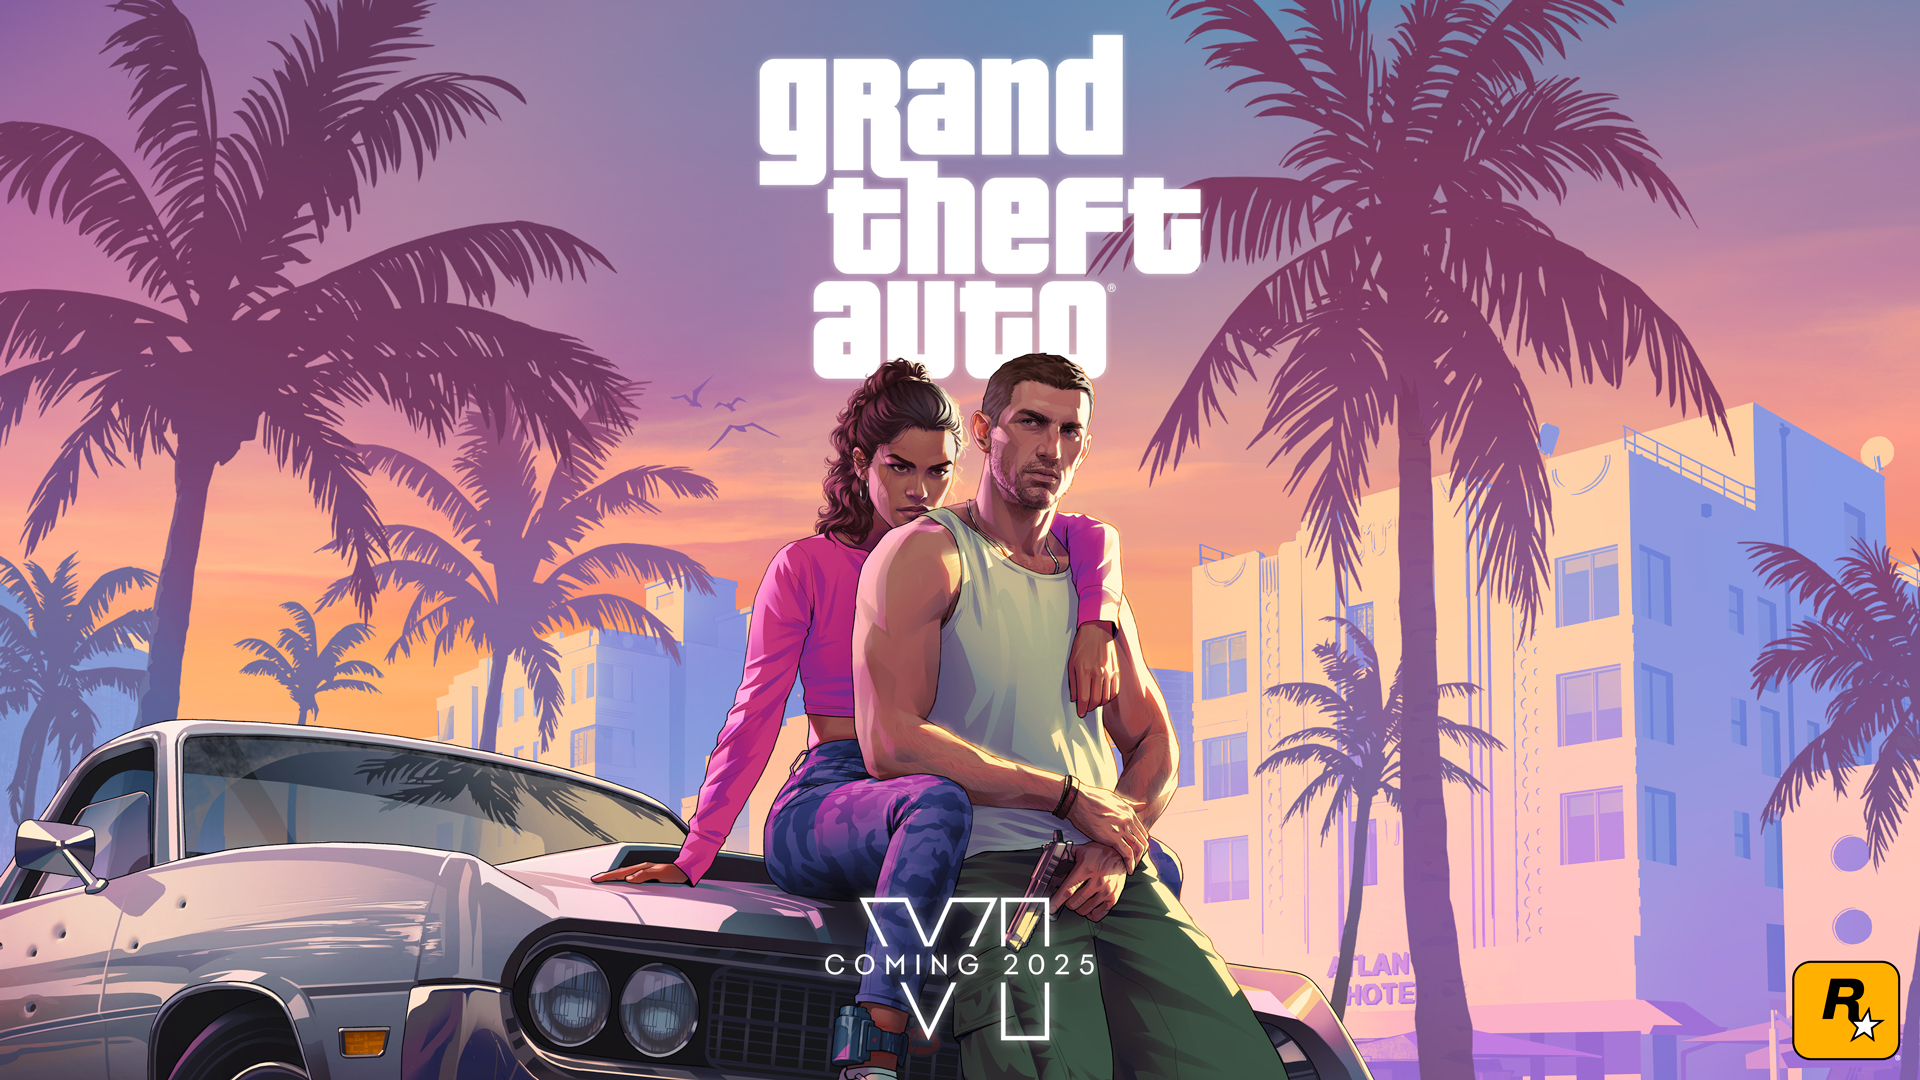 Exciting New Features in GTA 6 Vice City Adventures and Revolutionary Gameplay Revealed for 2025 Release